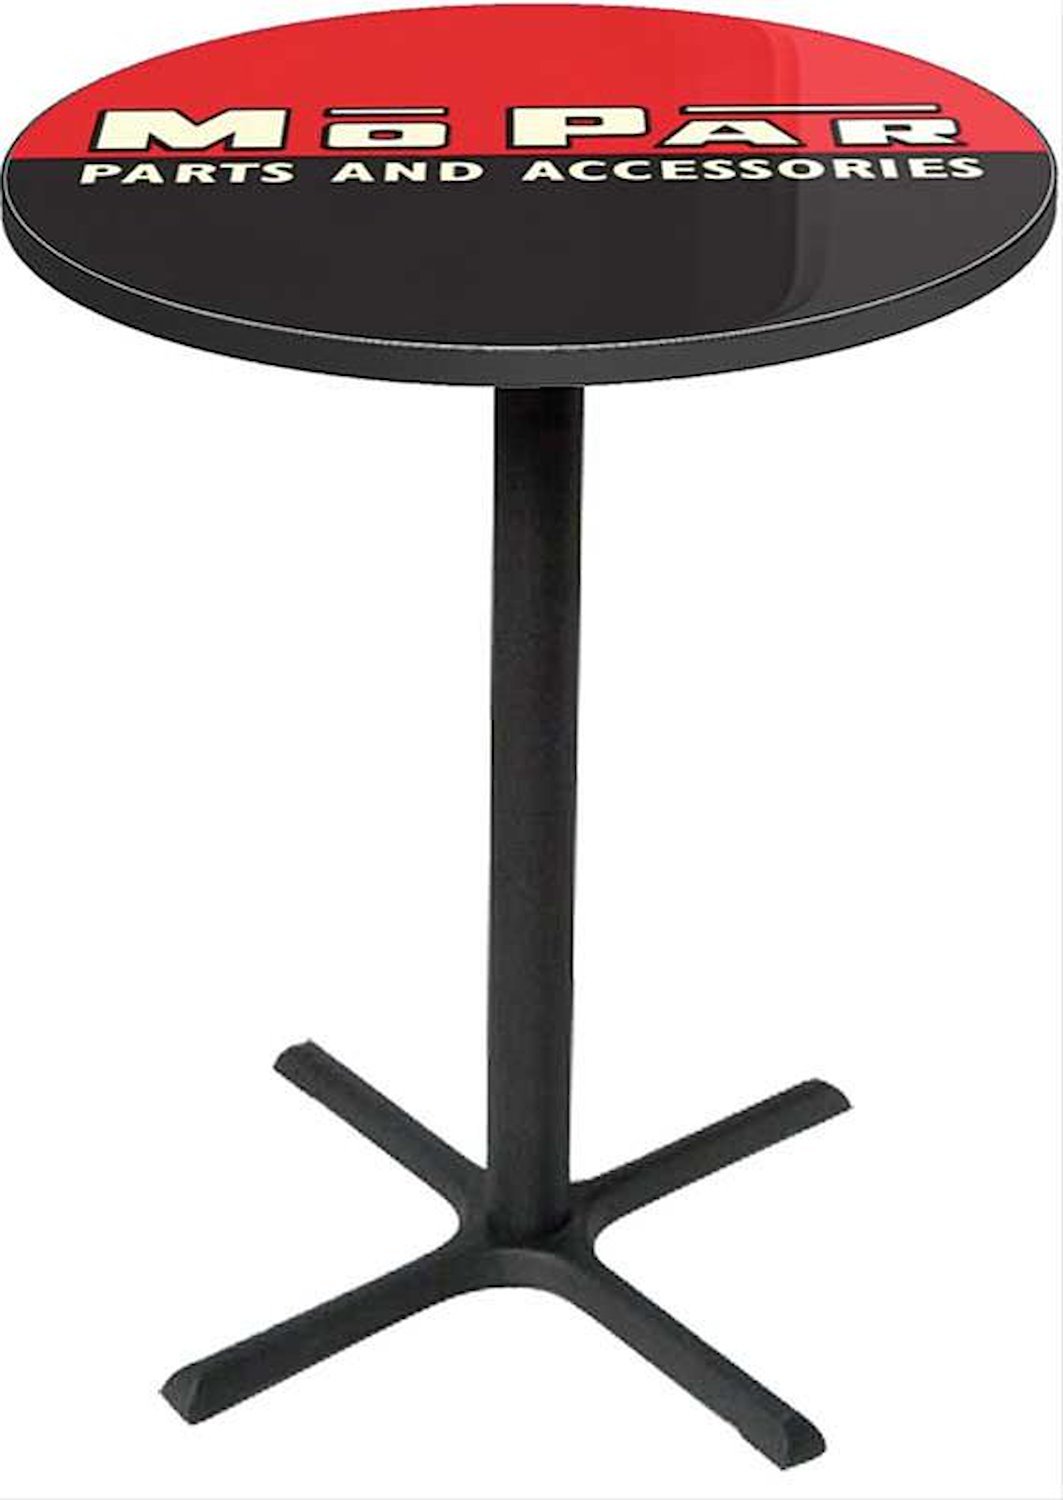 MD671103 Pub Table With Black Base 1948-53 Style Mopar Black/Red parts And Accessories Logo